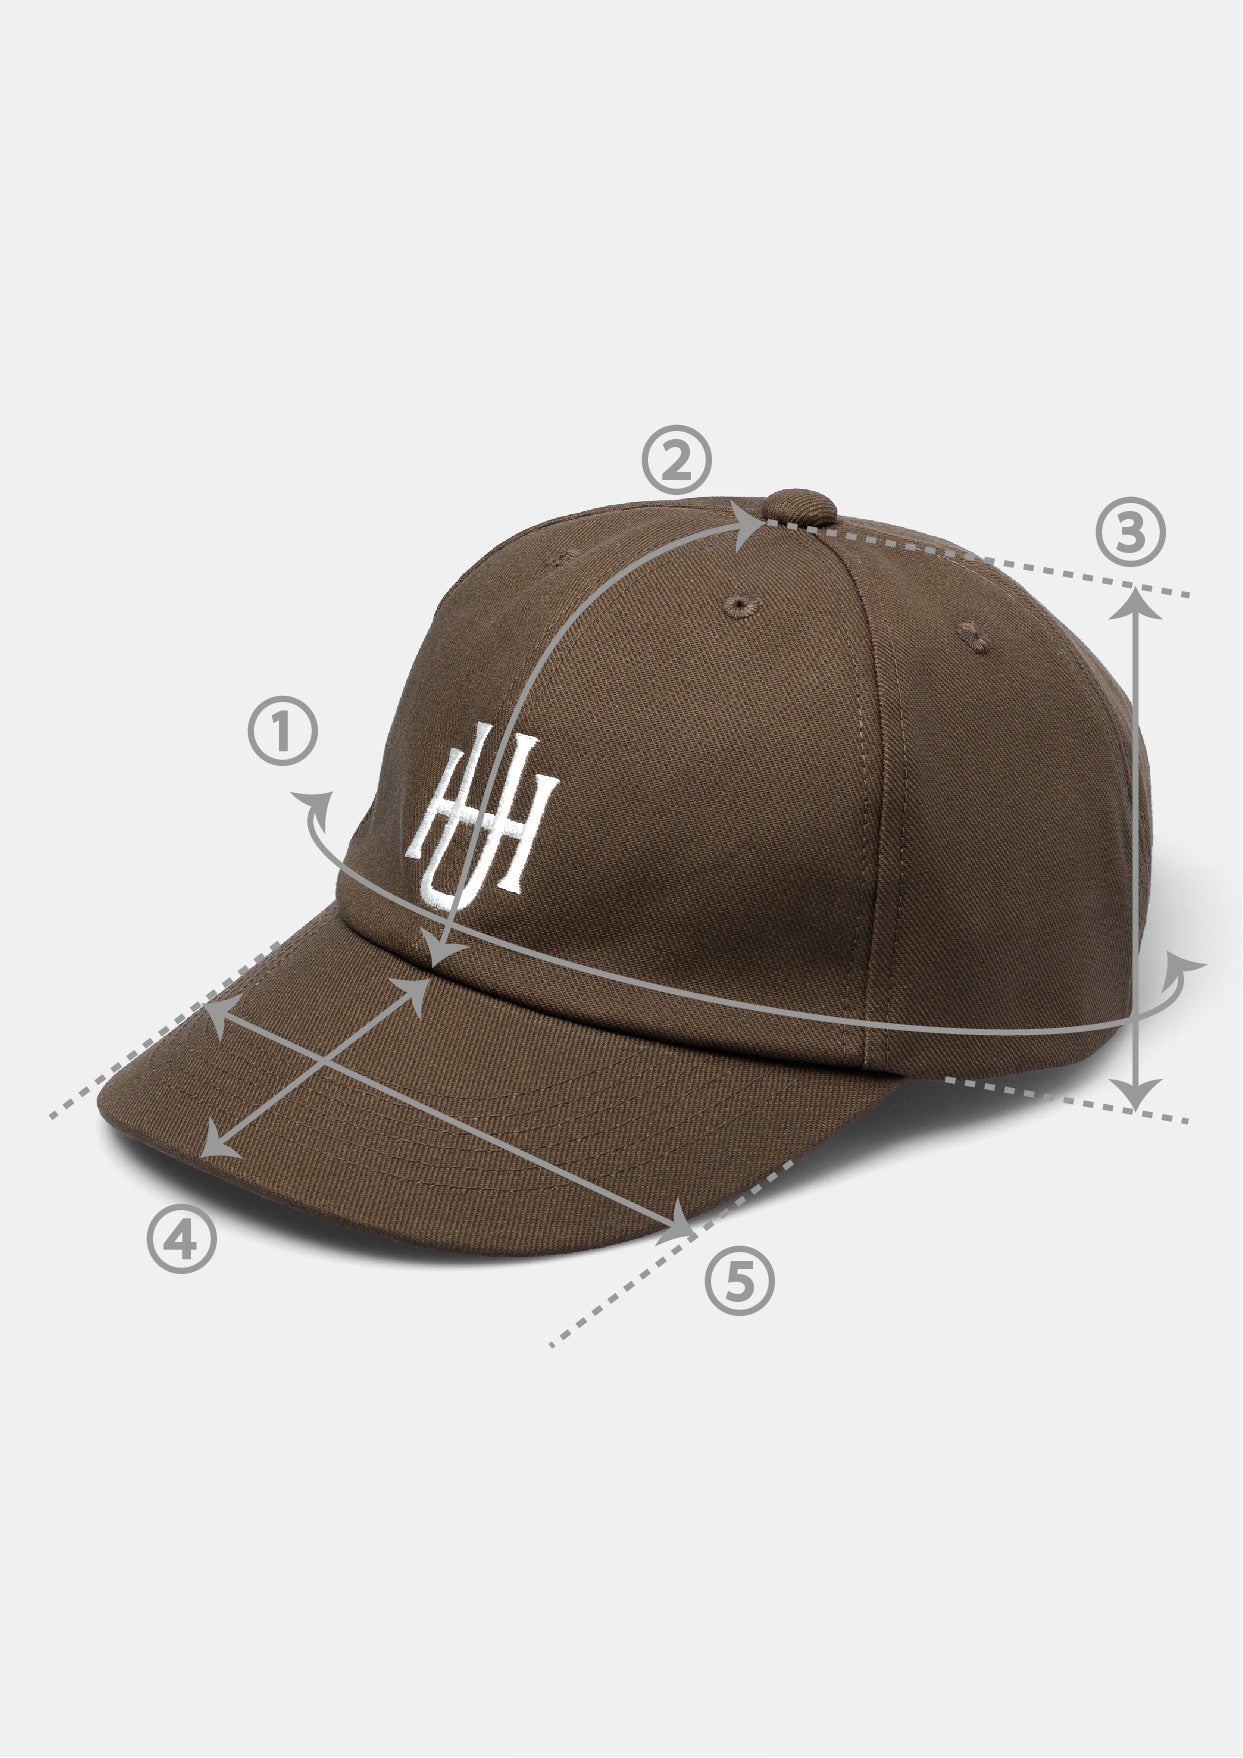 UNNAMED HEADWEAR MIDDLE-LOGO - キャップ